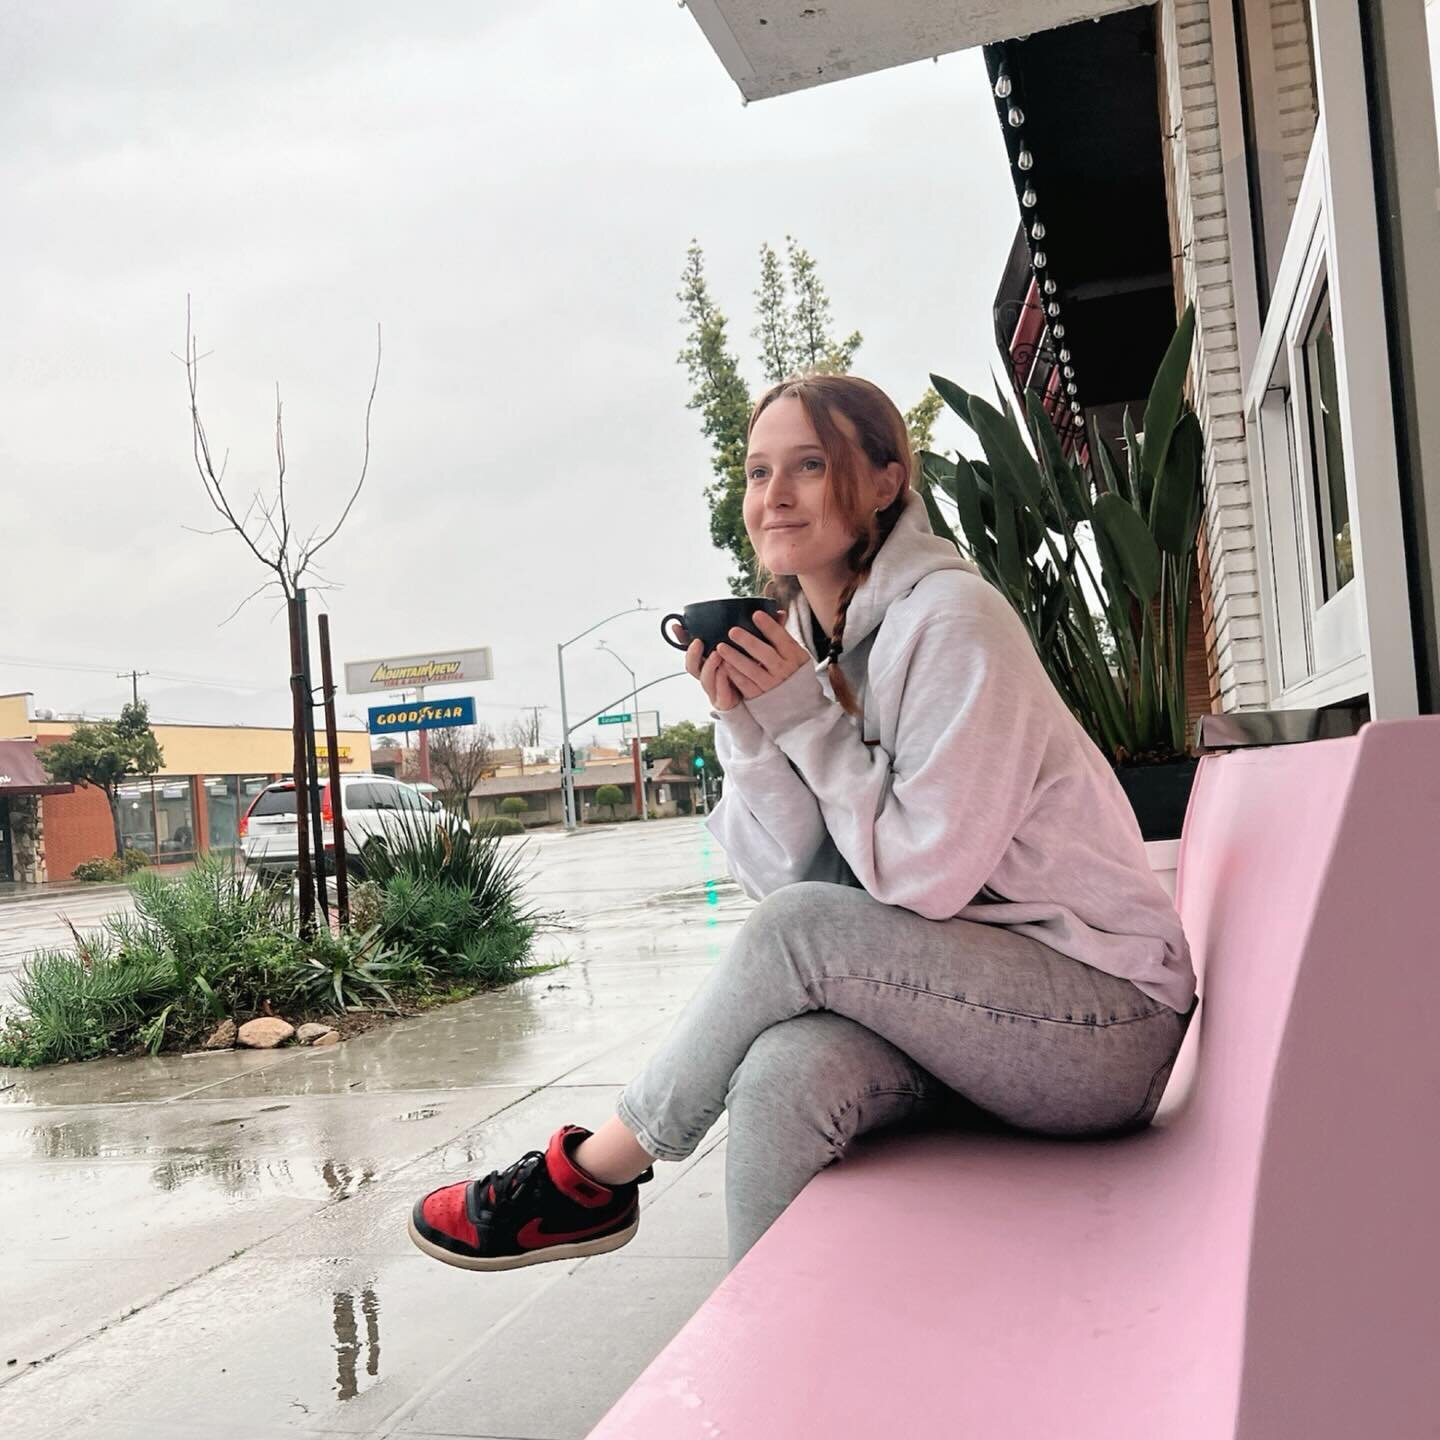 We&rsquo;re probably biased, but our bench is the best rainy day view in Burbank 💖☔️☕️

#coffee #burbank #rainyday